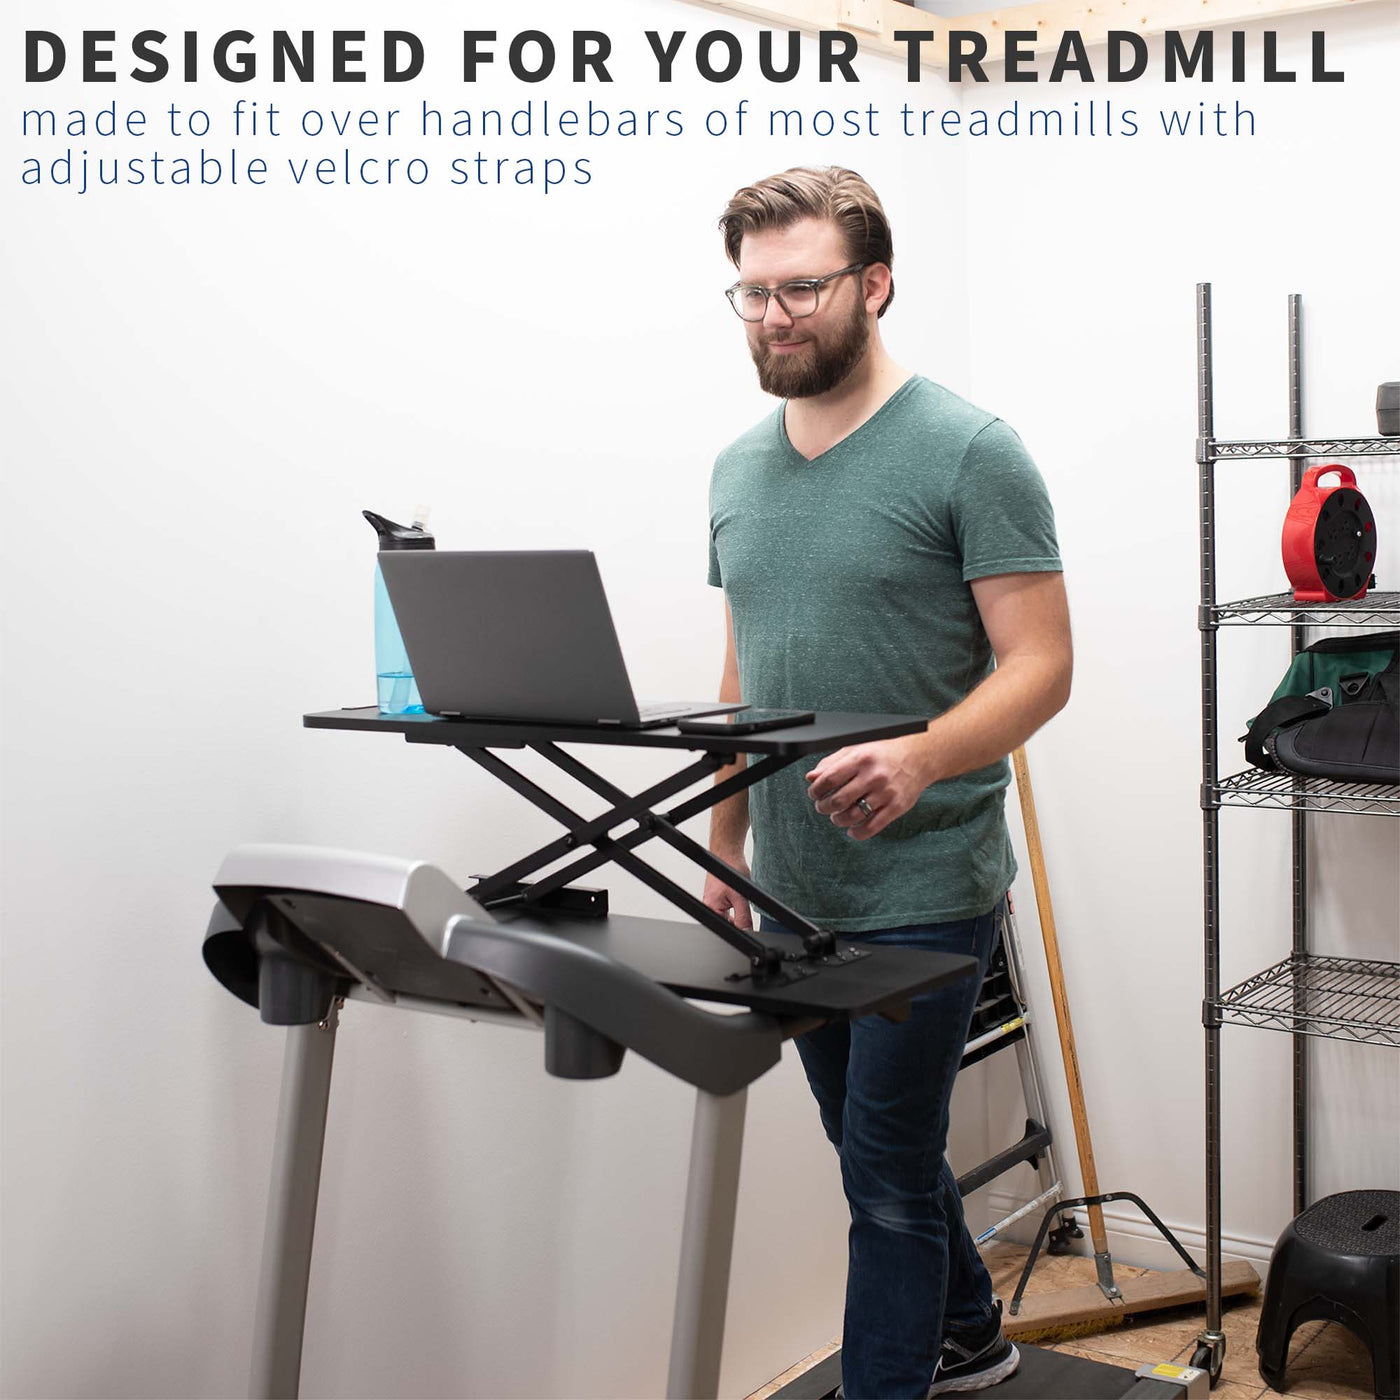 The treadmill workstation is designed to fit most treadmills on the market today.